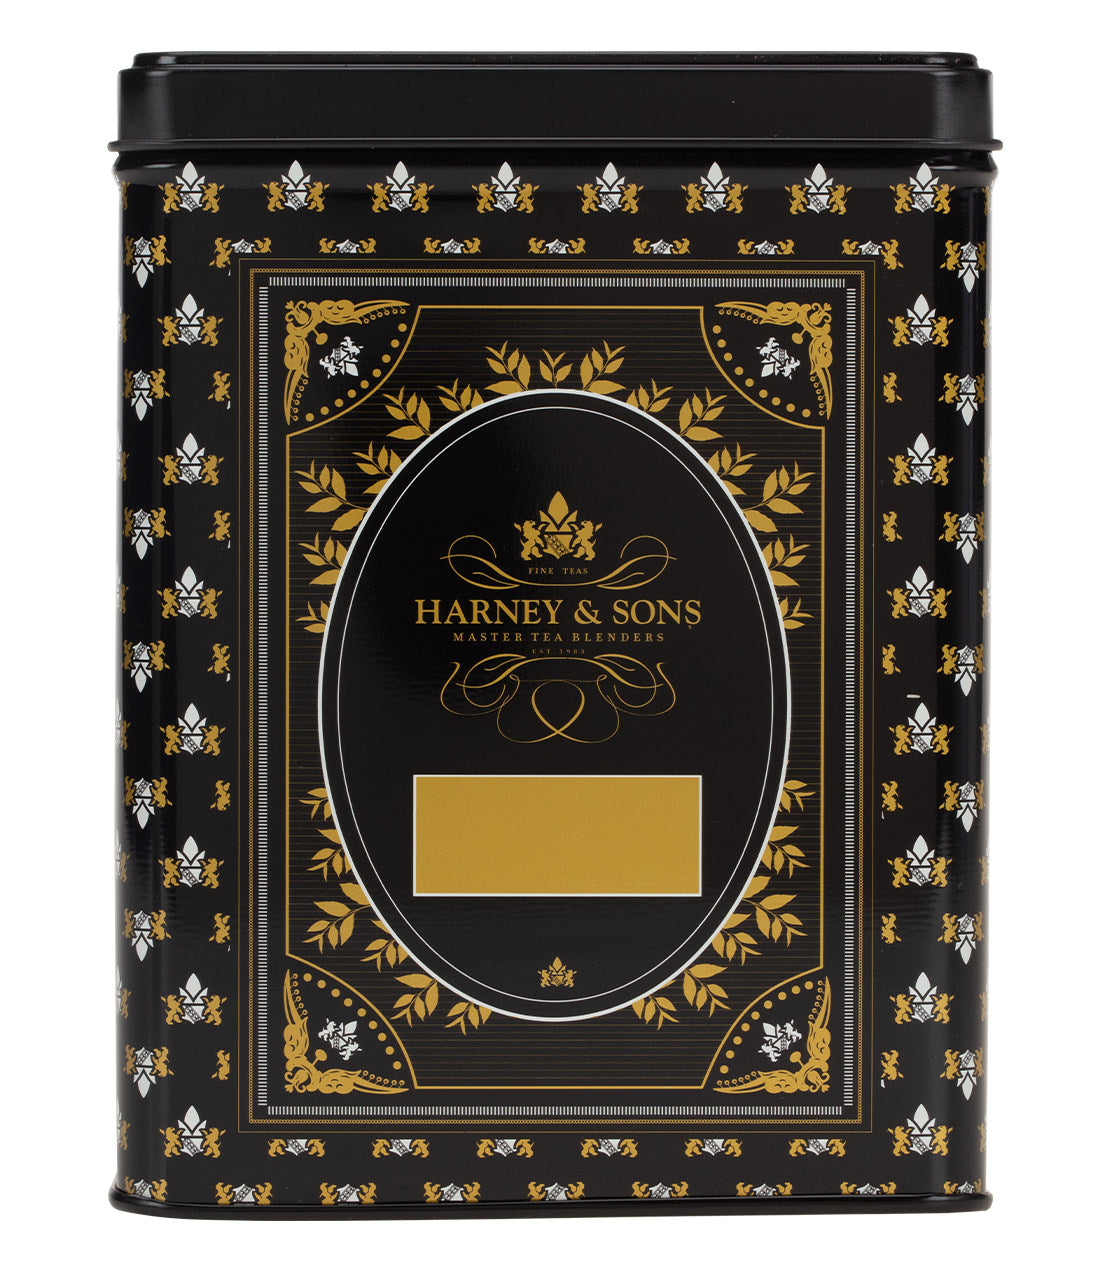 Harney & Sons Hinged Storage Canister